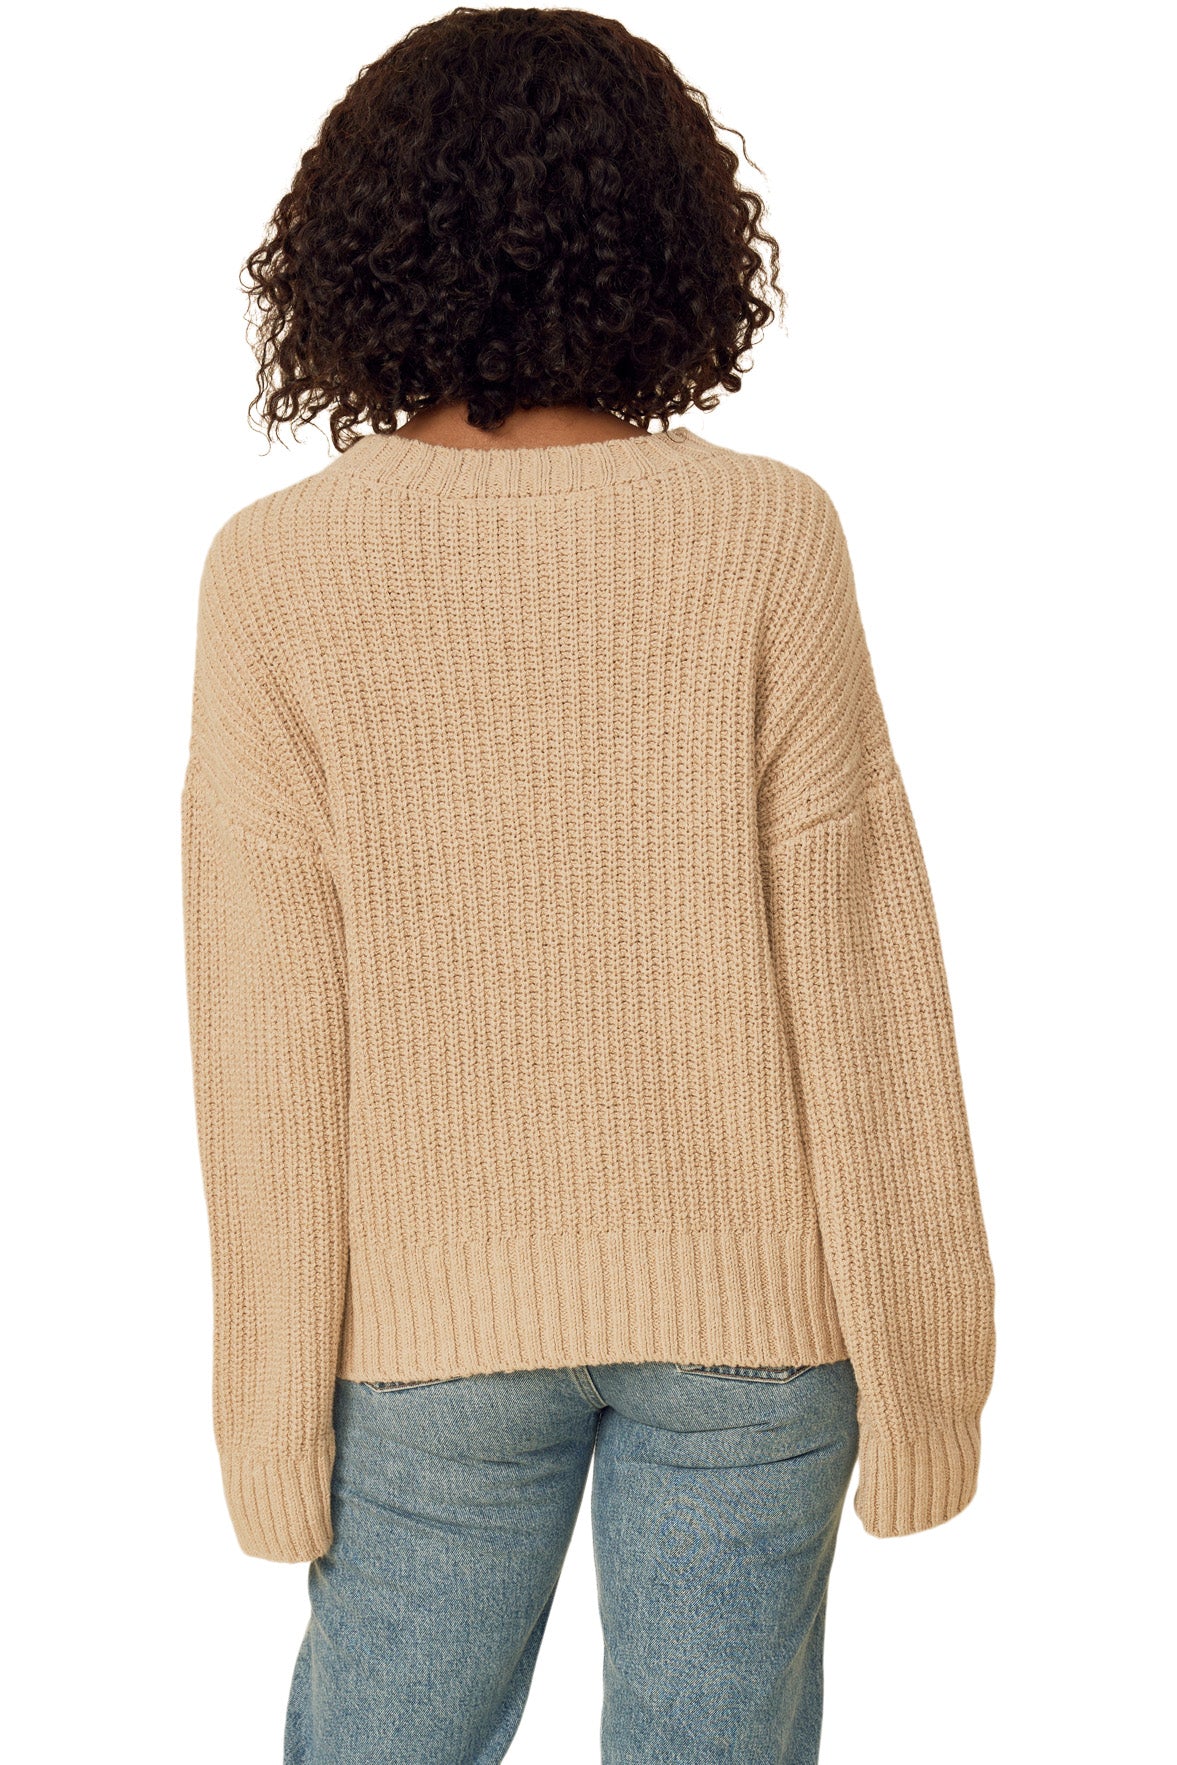 One Grey Day Seymour Oversided Pullover in Oatmeal